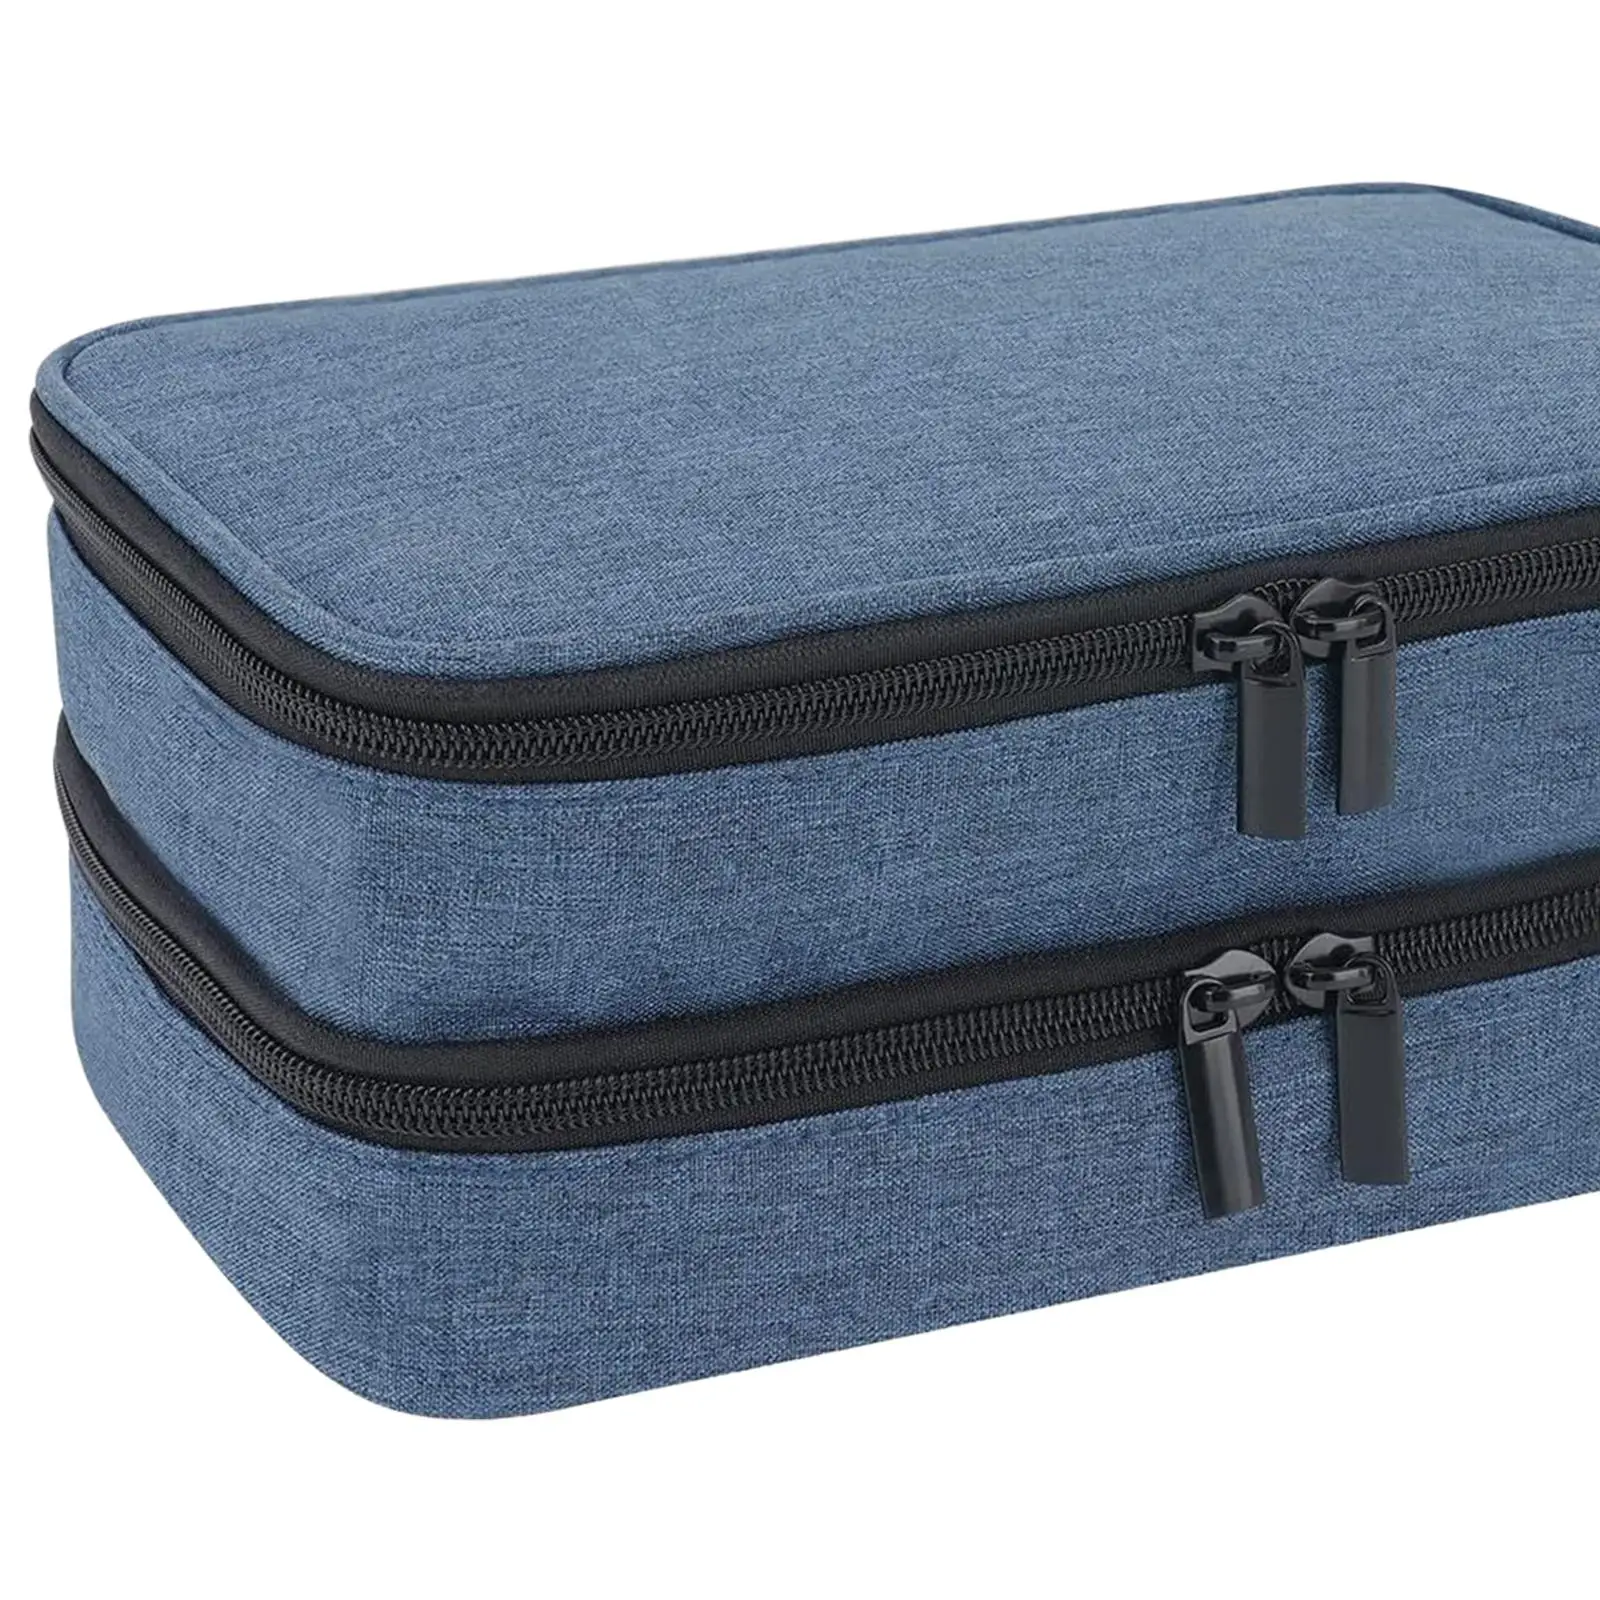 Cooler Travel Case Double Layers Protective Insulation Storage Bag Mini Isolated Pack Travel Bag for Ice Packs Pens Supplies